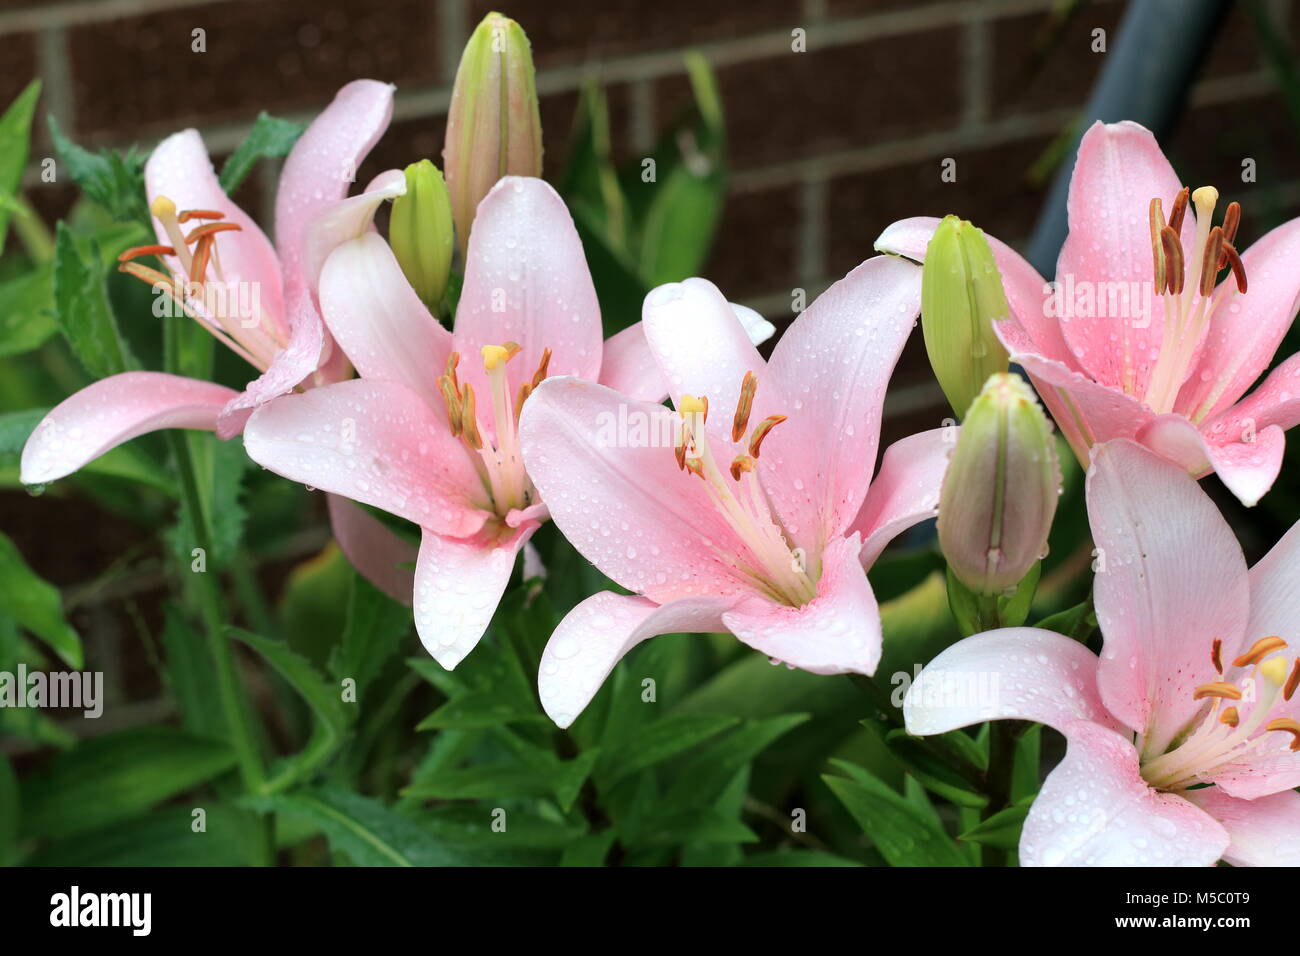 Blooming Lilium or Lilies growing in a pot Stock Photo